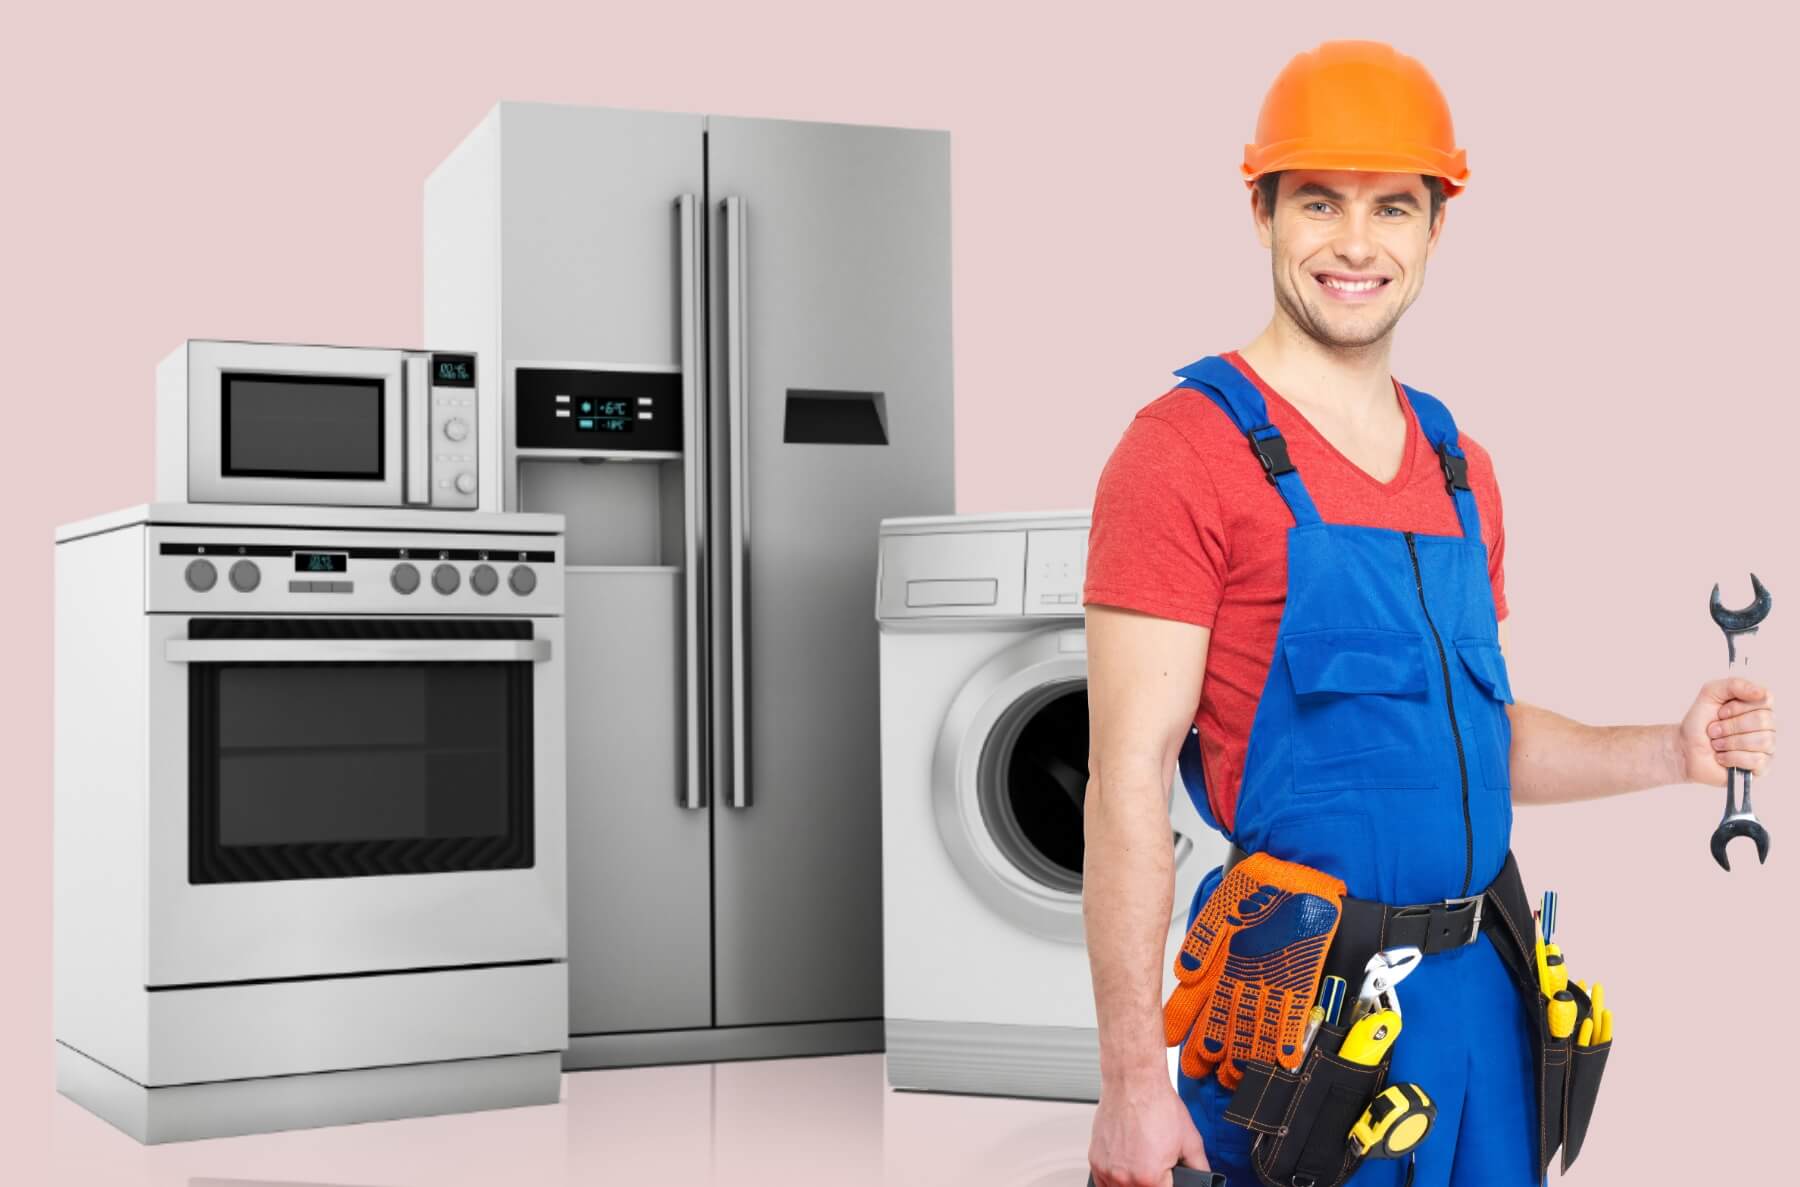 an image representing the major home appliances and a technician repairing it.